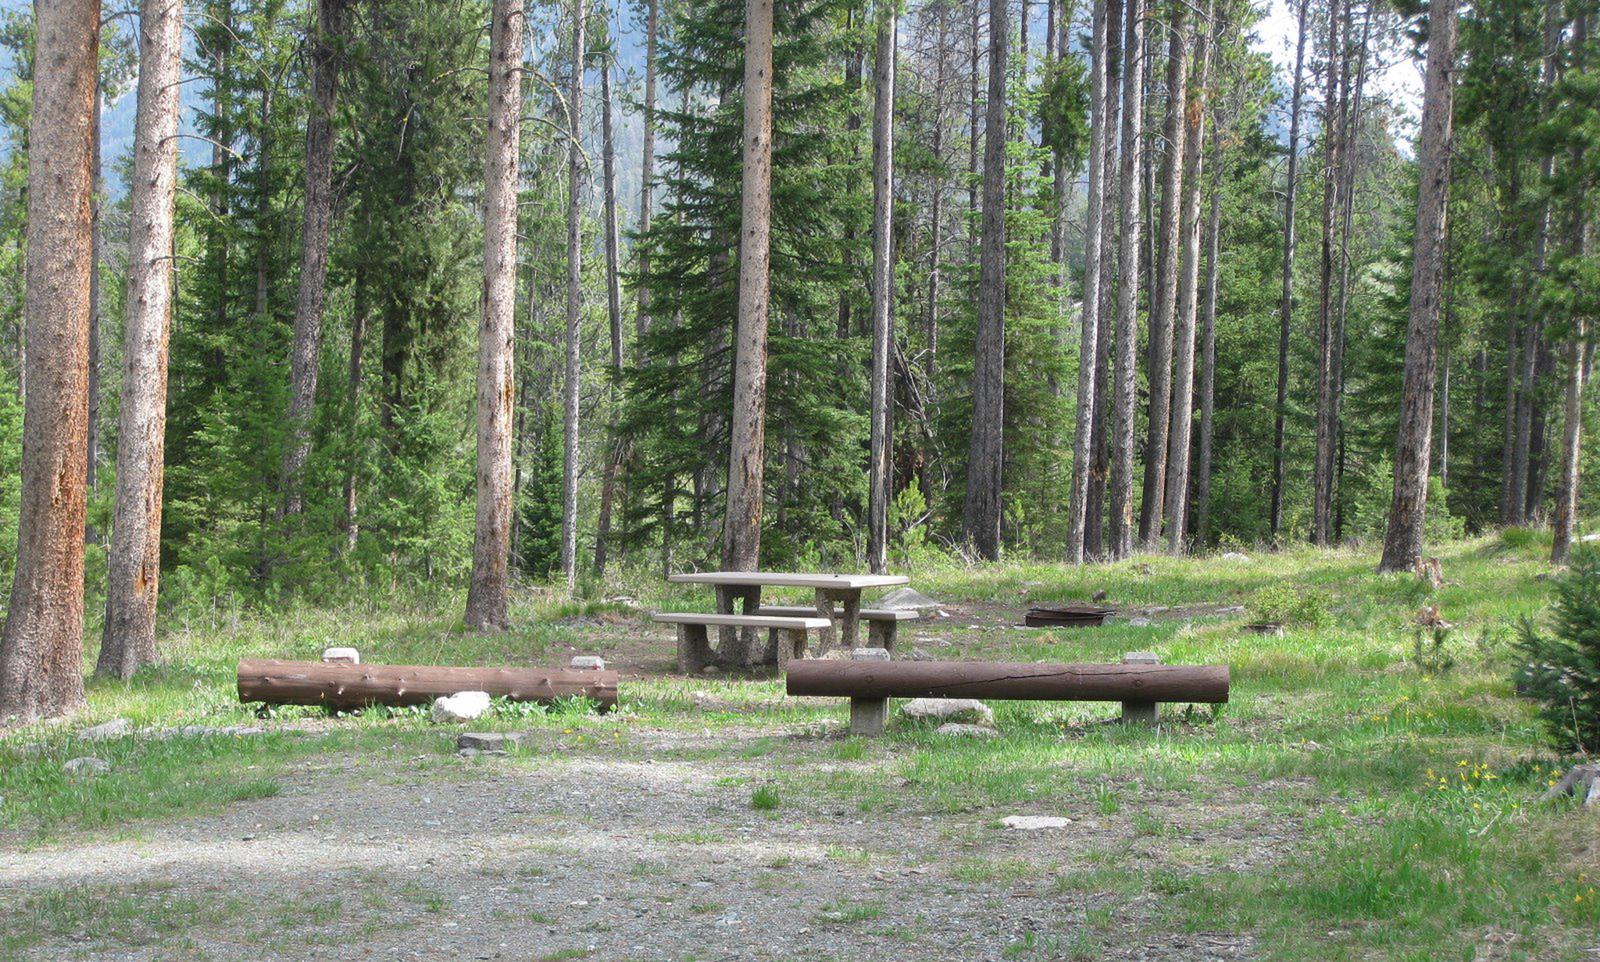 Site A18, campsite surrounded by pine trees, picnic table & fire ringSite A18